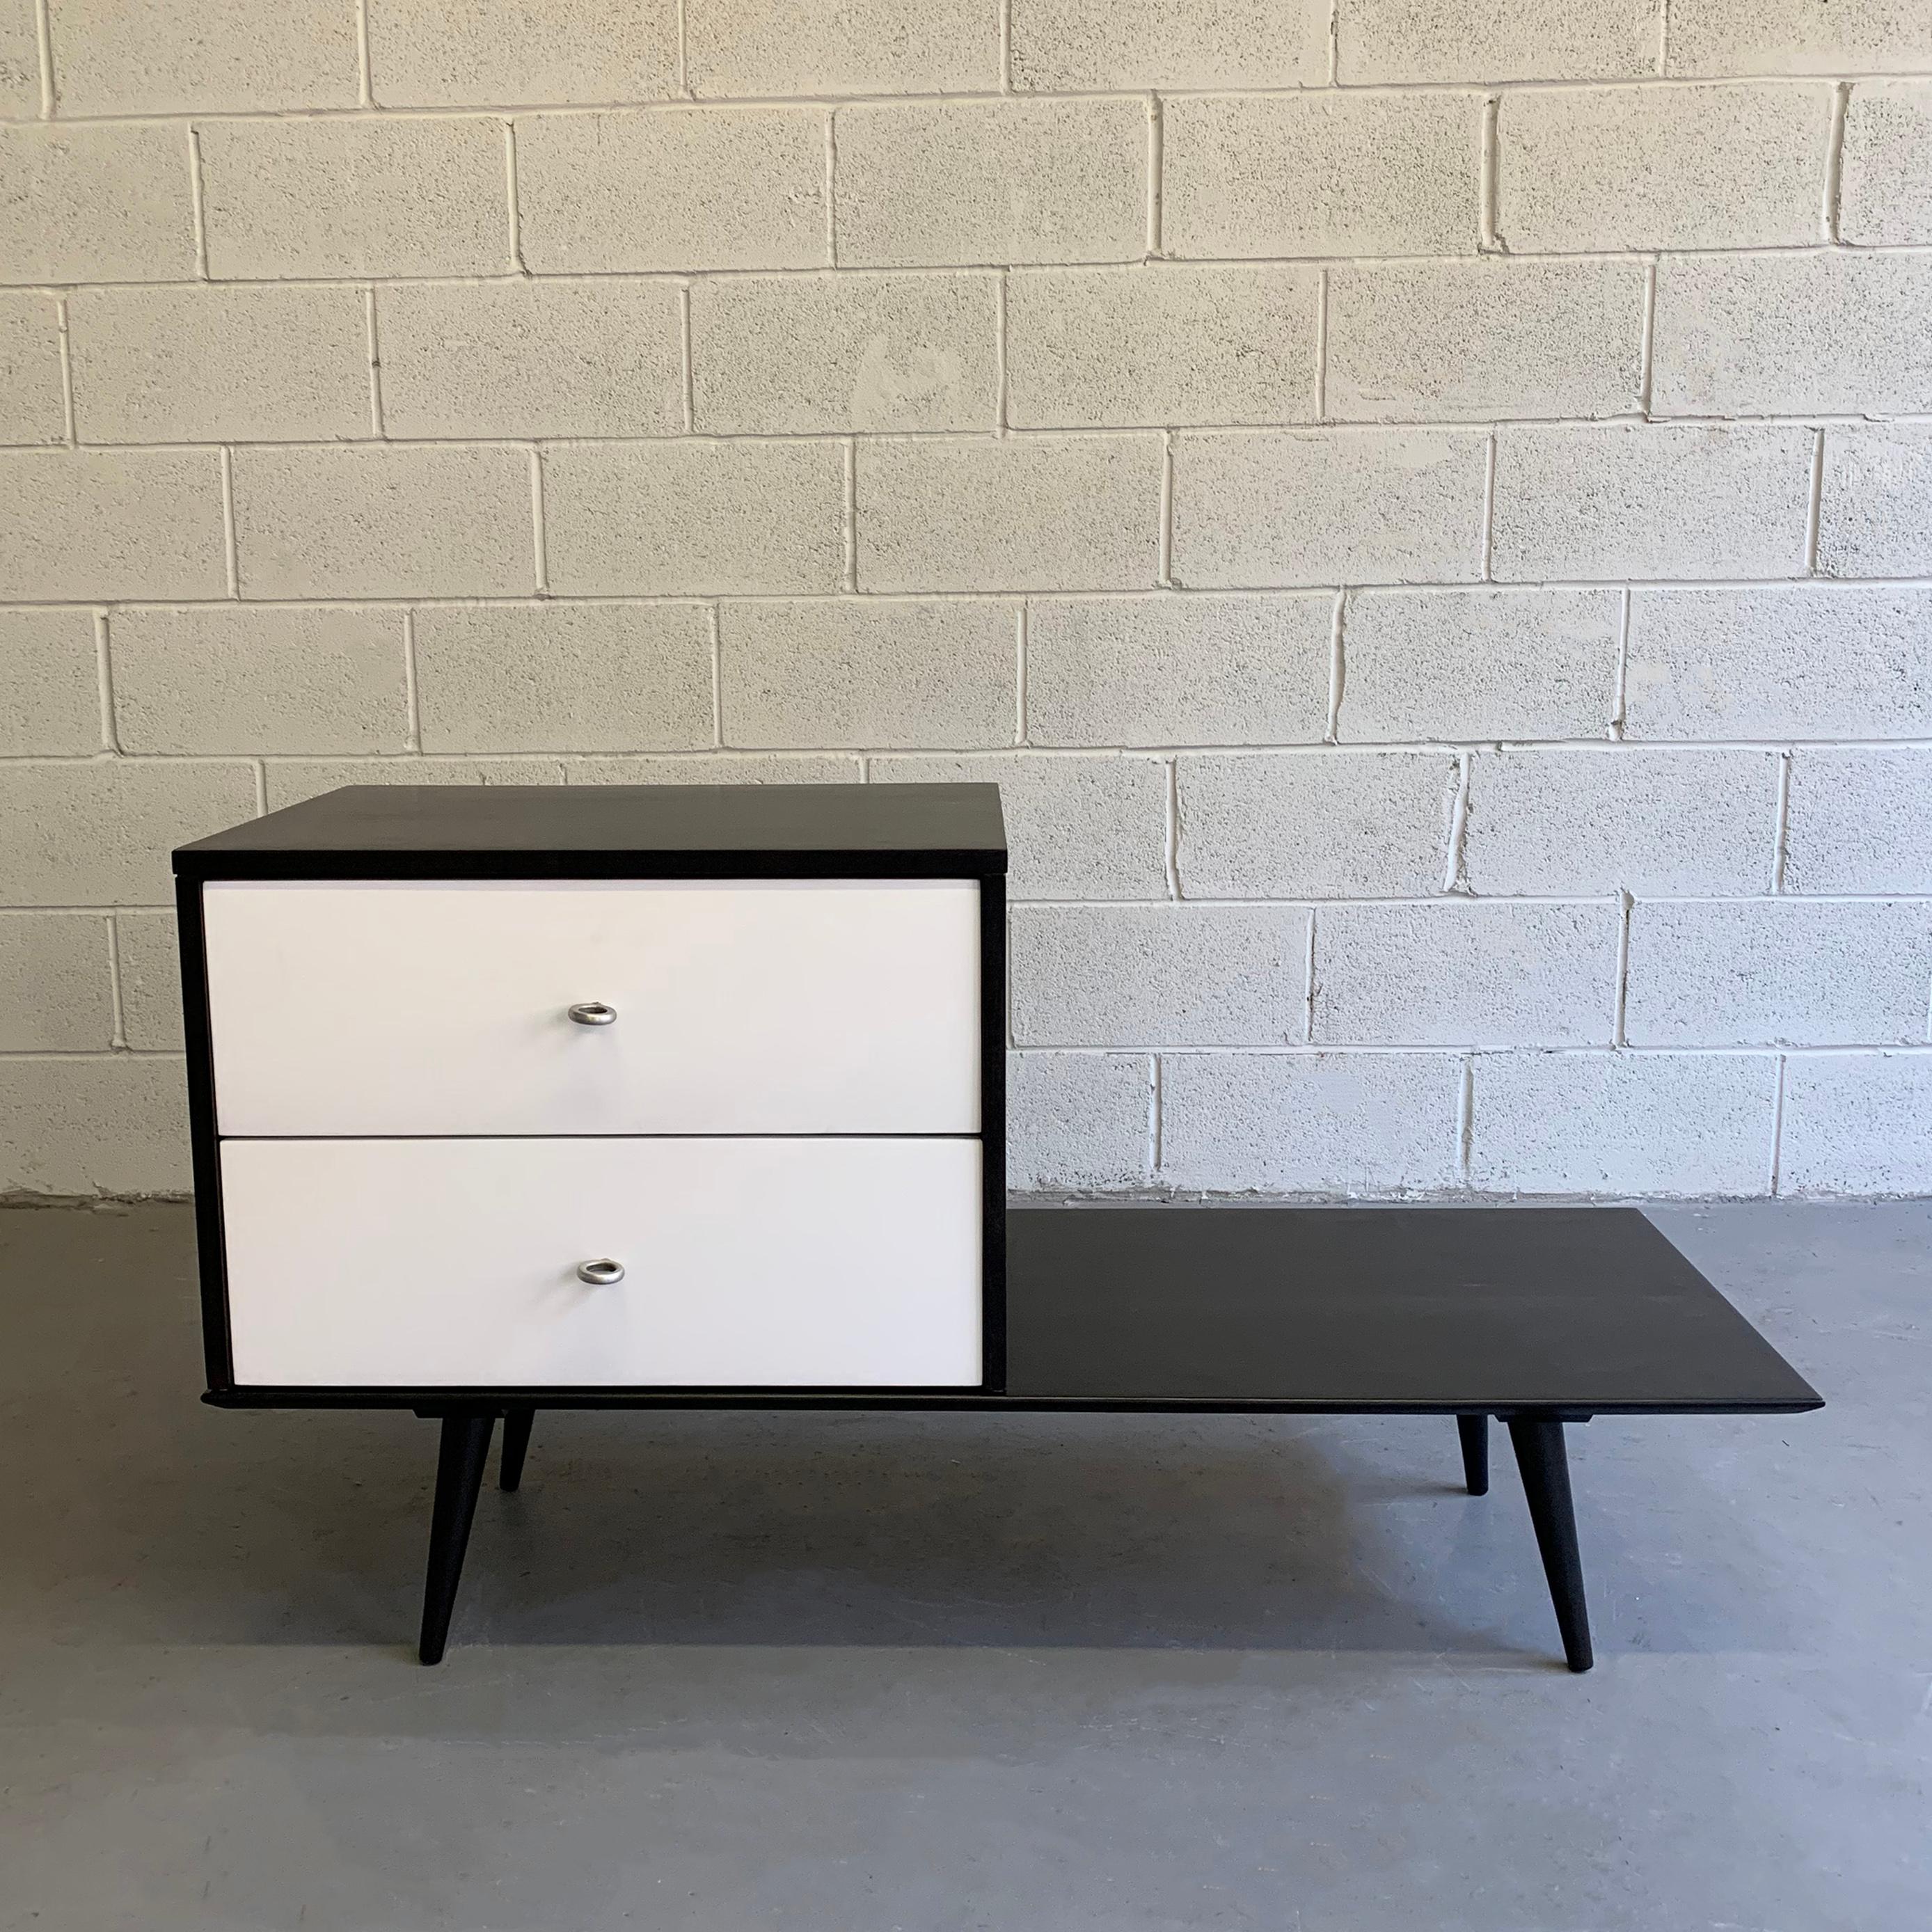 Mid-Century Modern, 2 piece, lacquered black and white, modular, maple dresser unit by Paul McCobb Planner Group Winchendon features a 2-drawer dresser with brass hourglass pulls on a 10 inch high platform that can be used as a bench or side table.